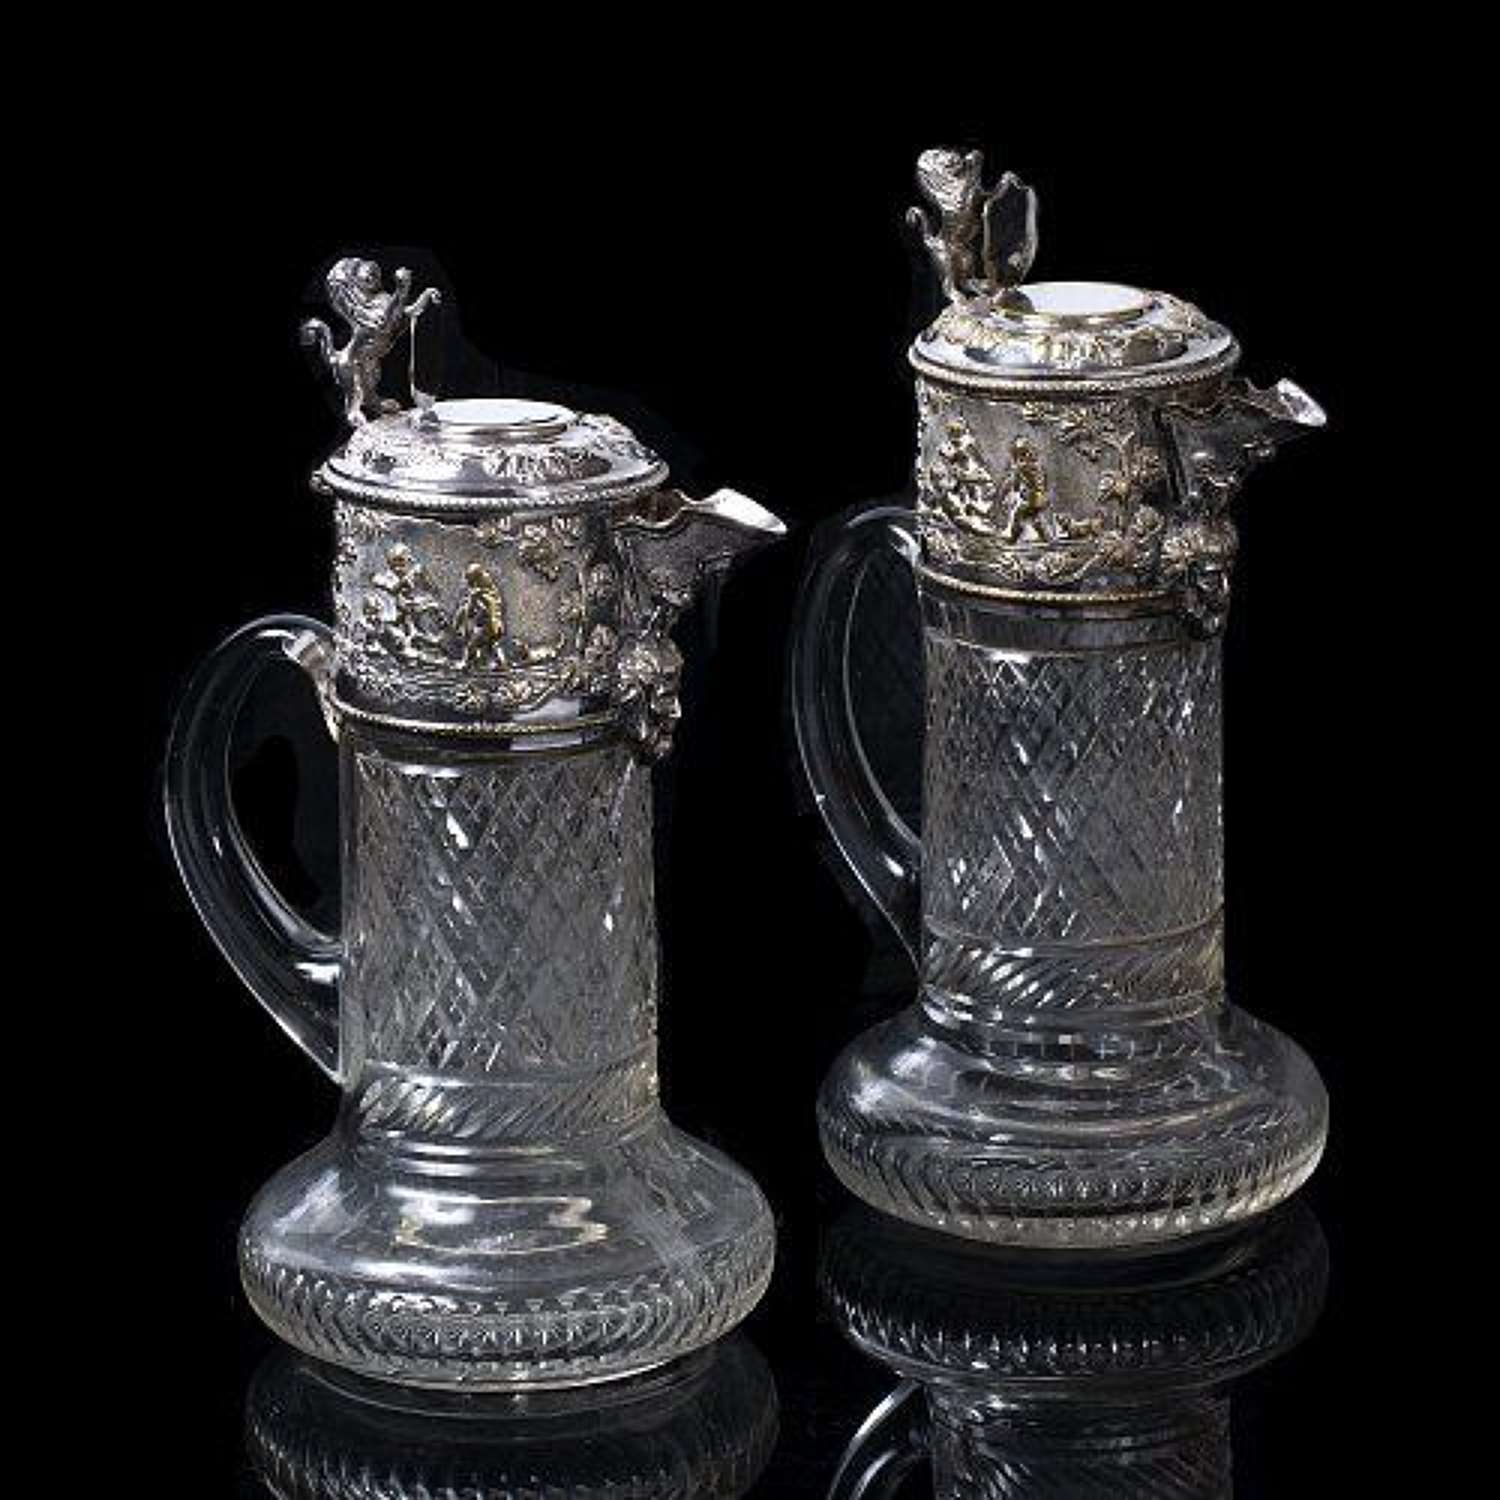 Lovely Pair of Cut Glass Claret Jugs